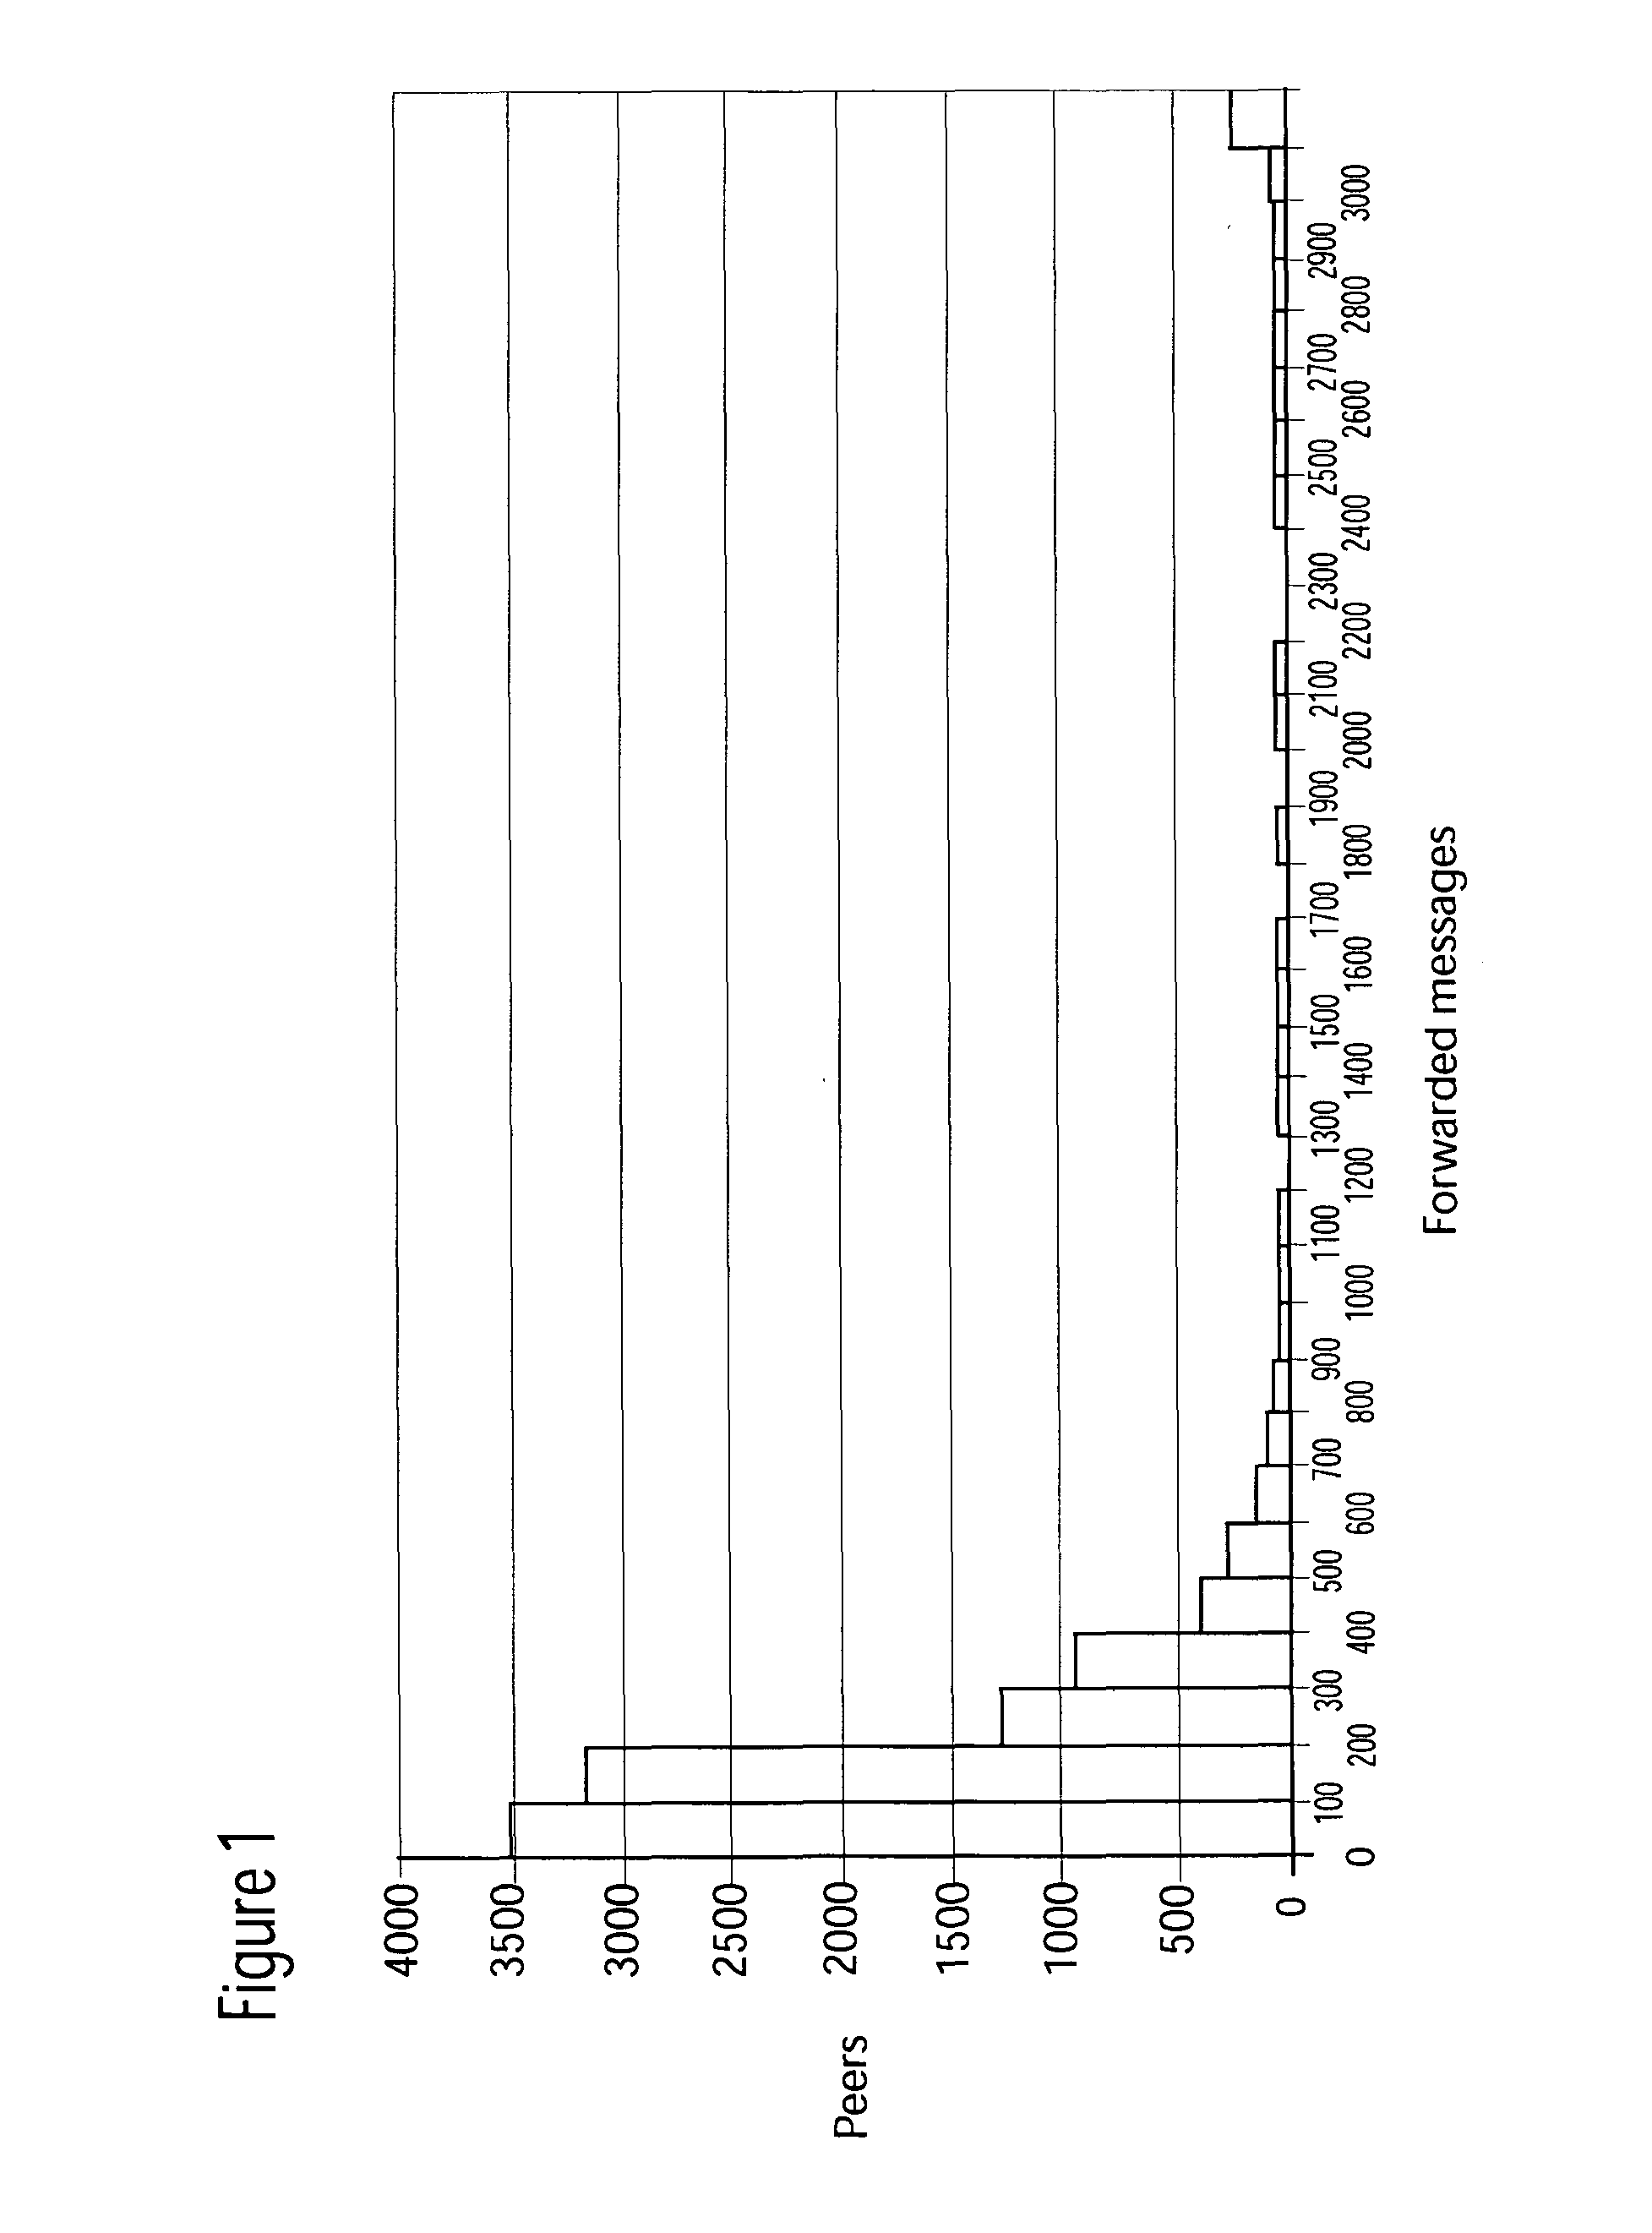 Load Balancing Method and System for Peer-To-Peer Networks